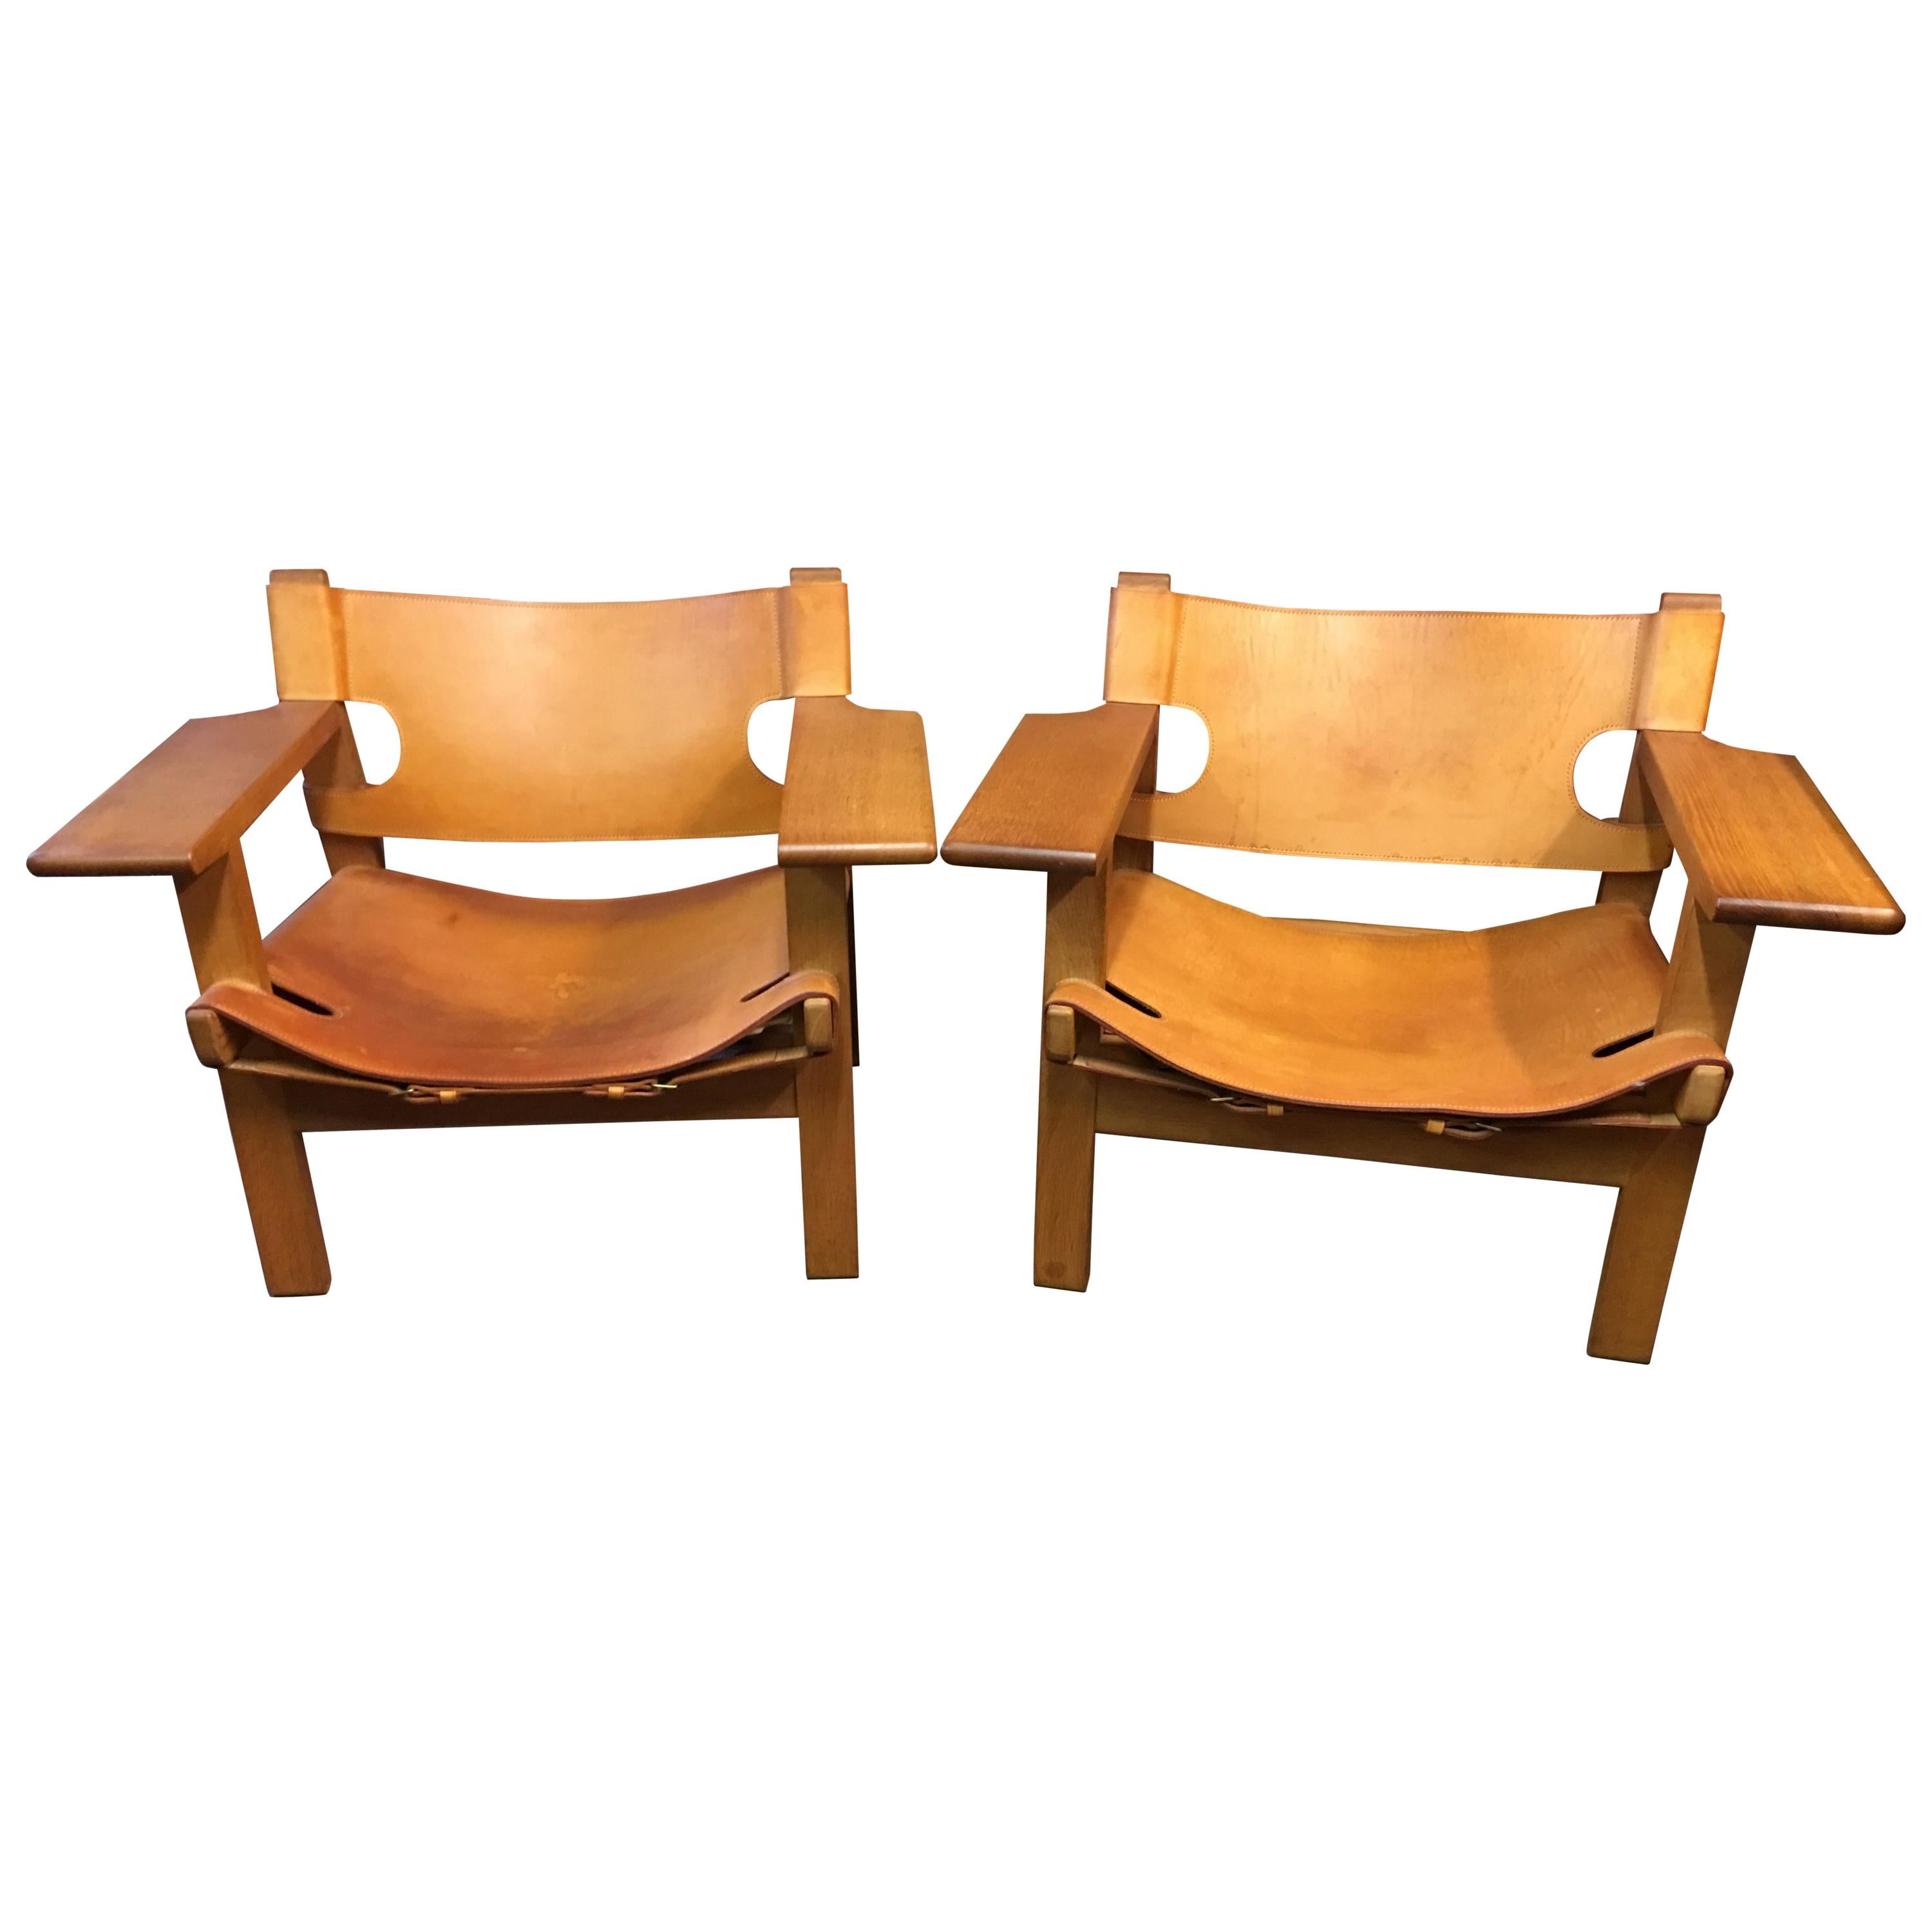 Pair of Original Oak and Saddle Leather 'Spanish Chairs' by Borge Mogensen